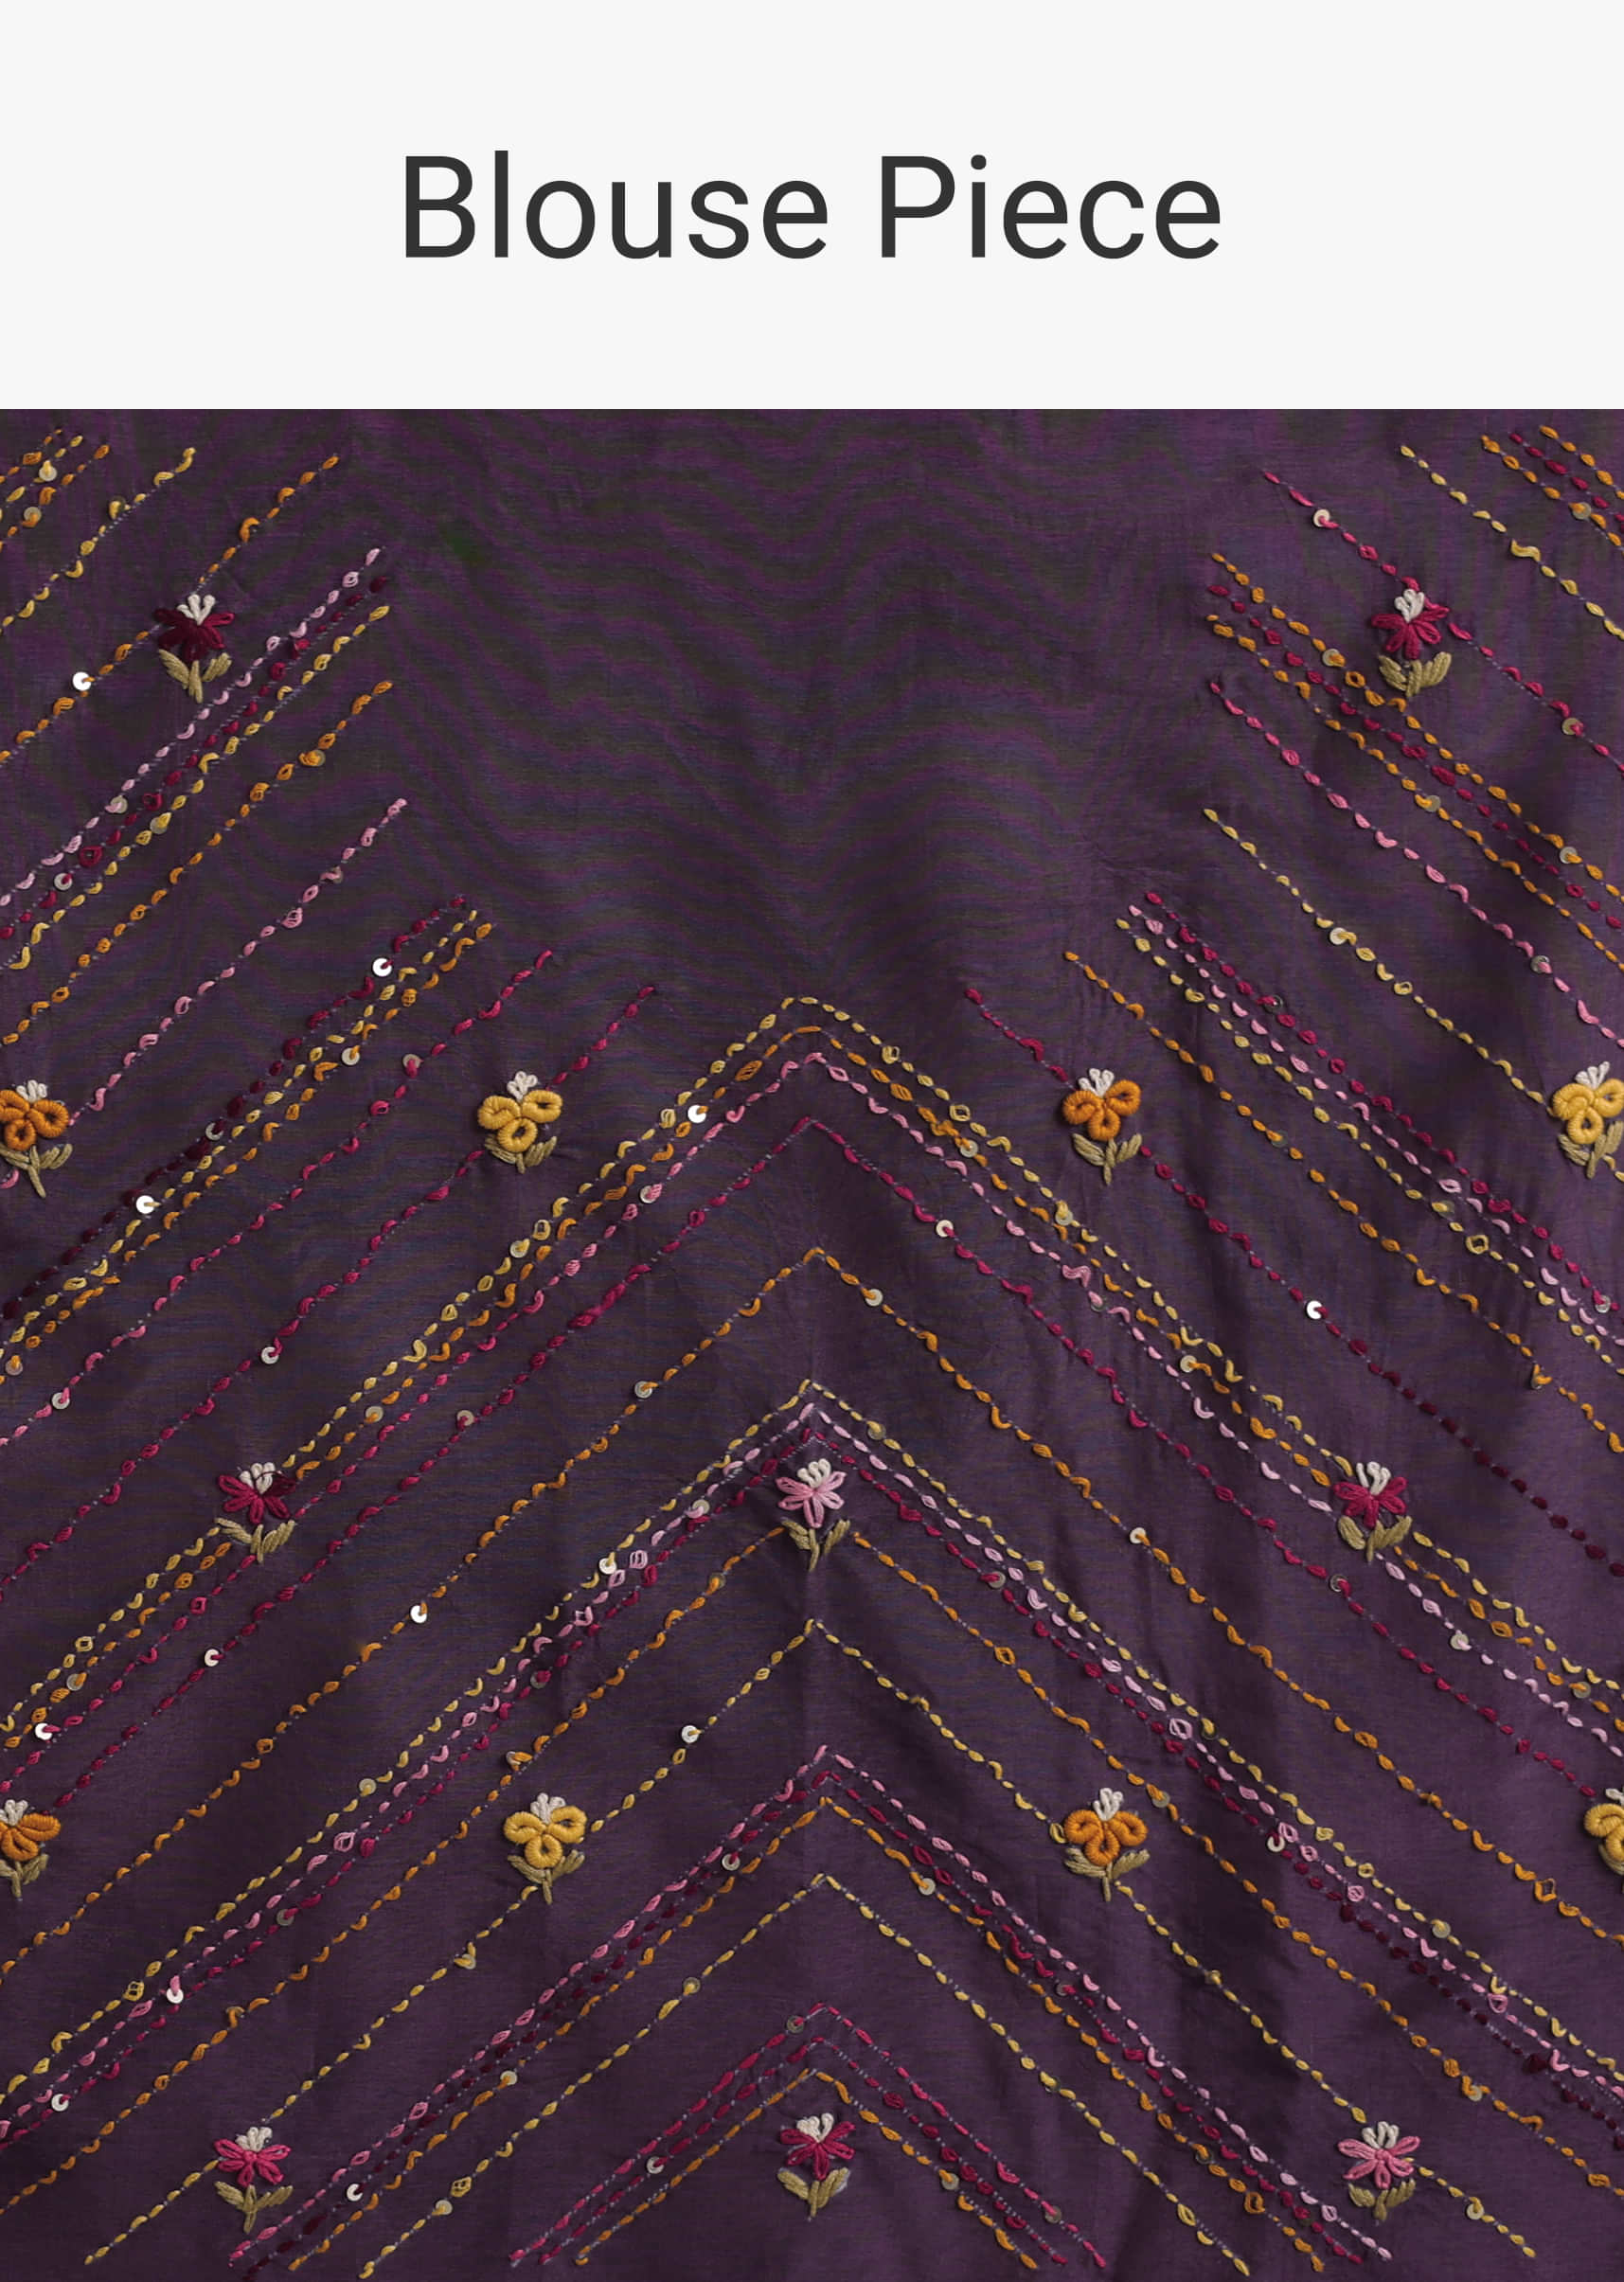 Purple Resham 3D Bud Embroidered Ombre Saree With Brocade And Thread Work In Dola Crepe